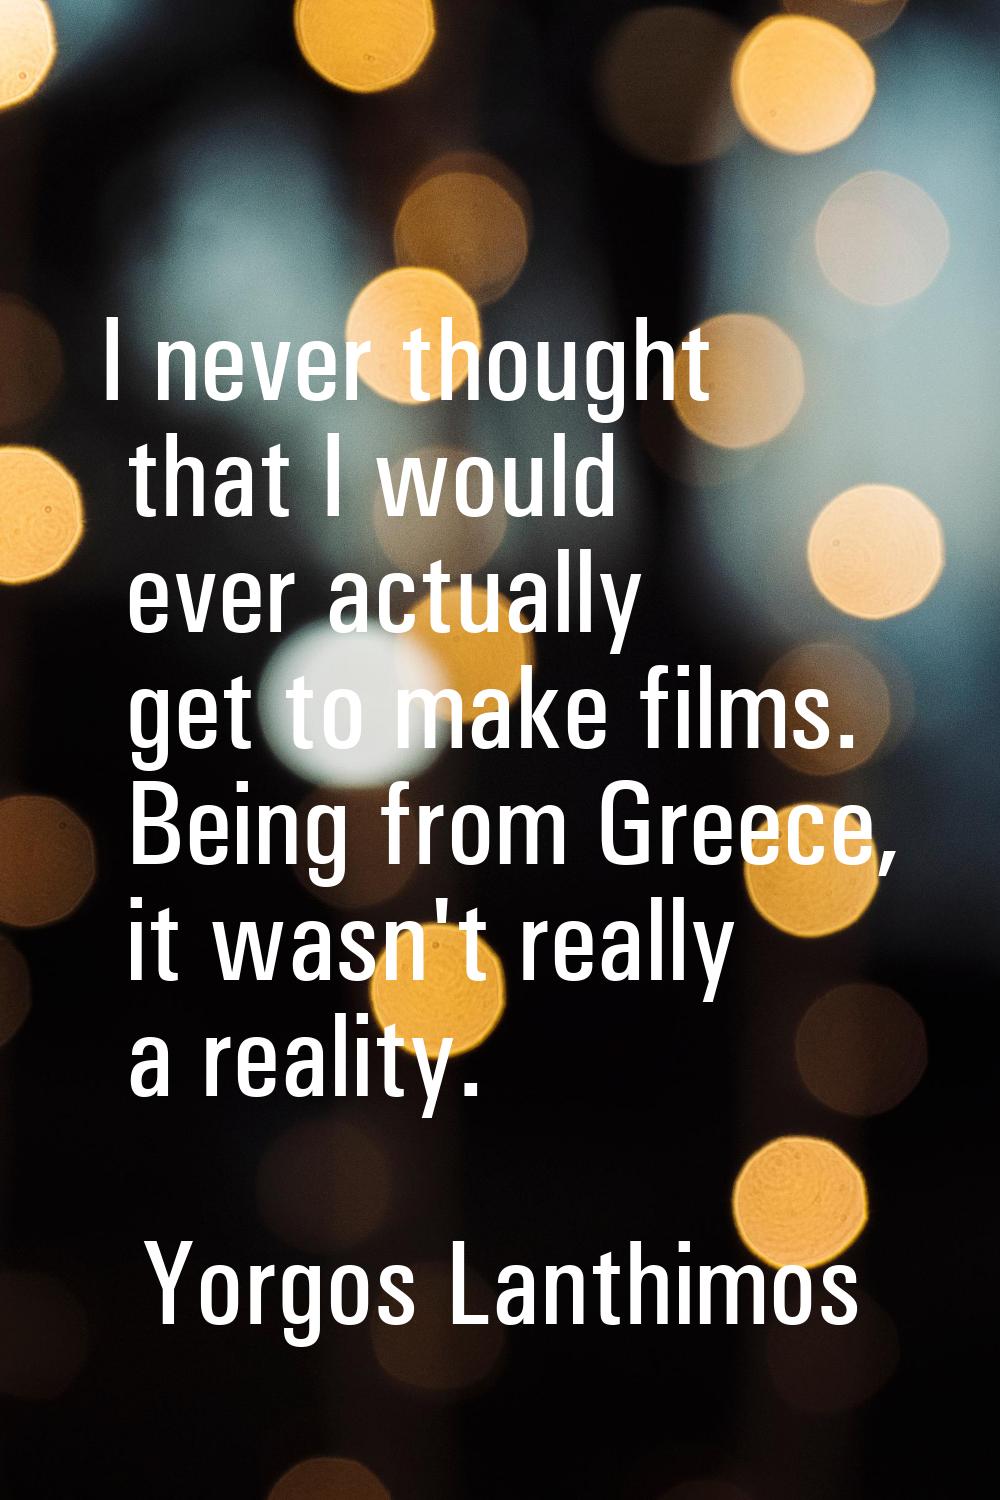 I never thought that I would ever actually get to make films. Being from Greece, it wasn't really a